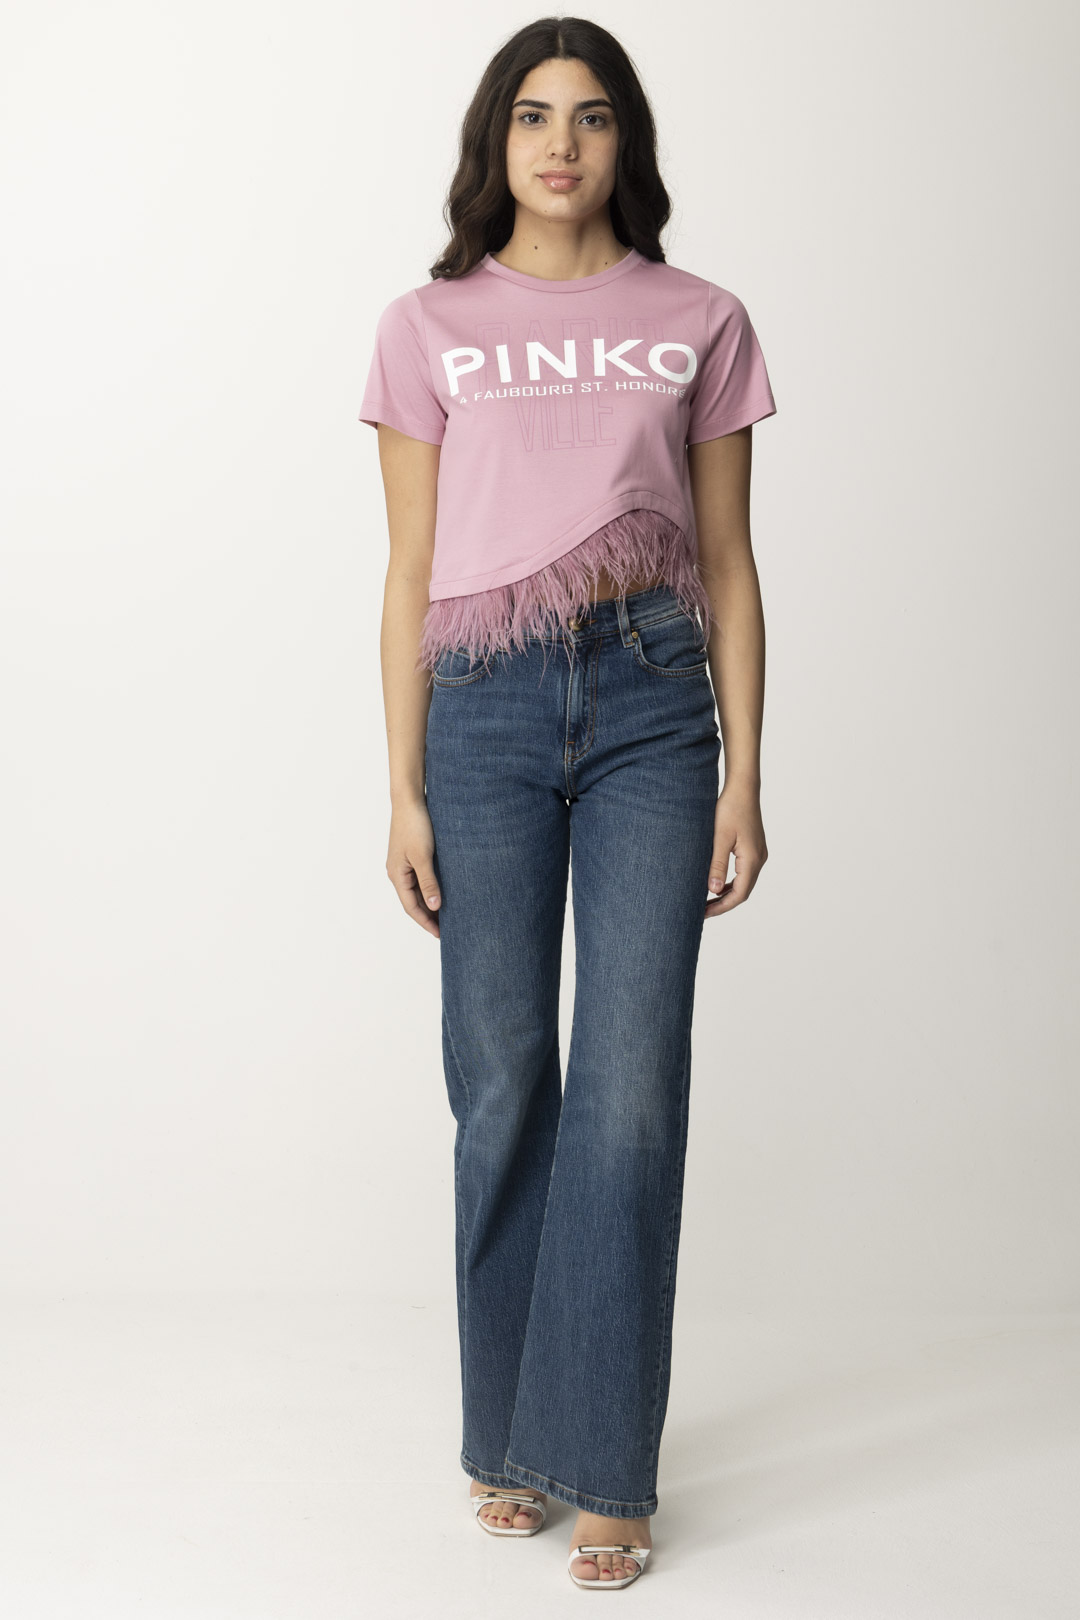 Preview: Pinko T-shirt with logo and feathers FUMO ORCHIDEA